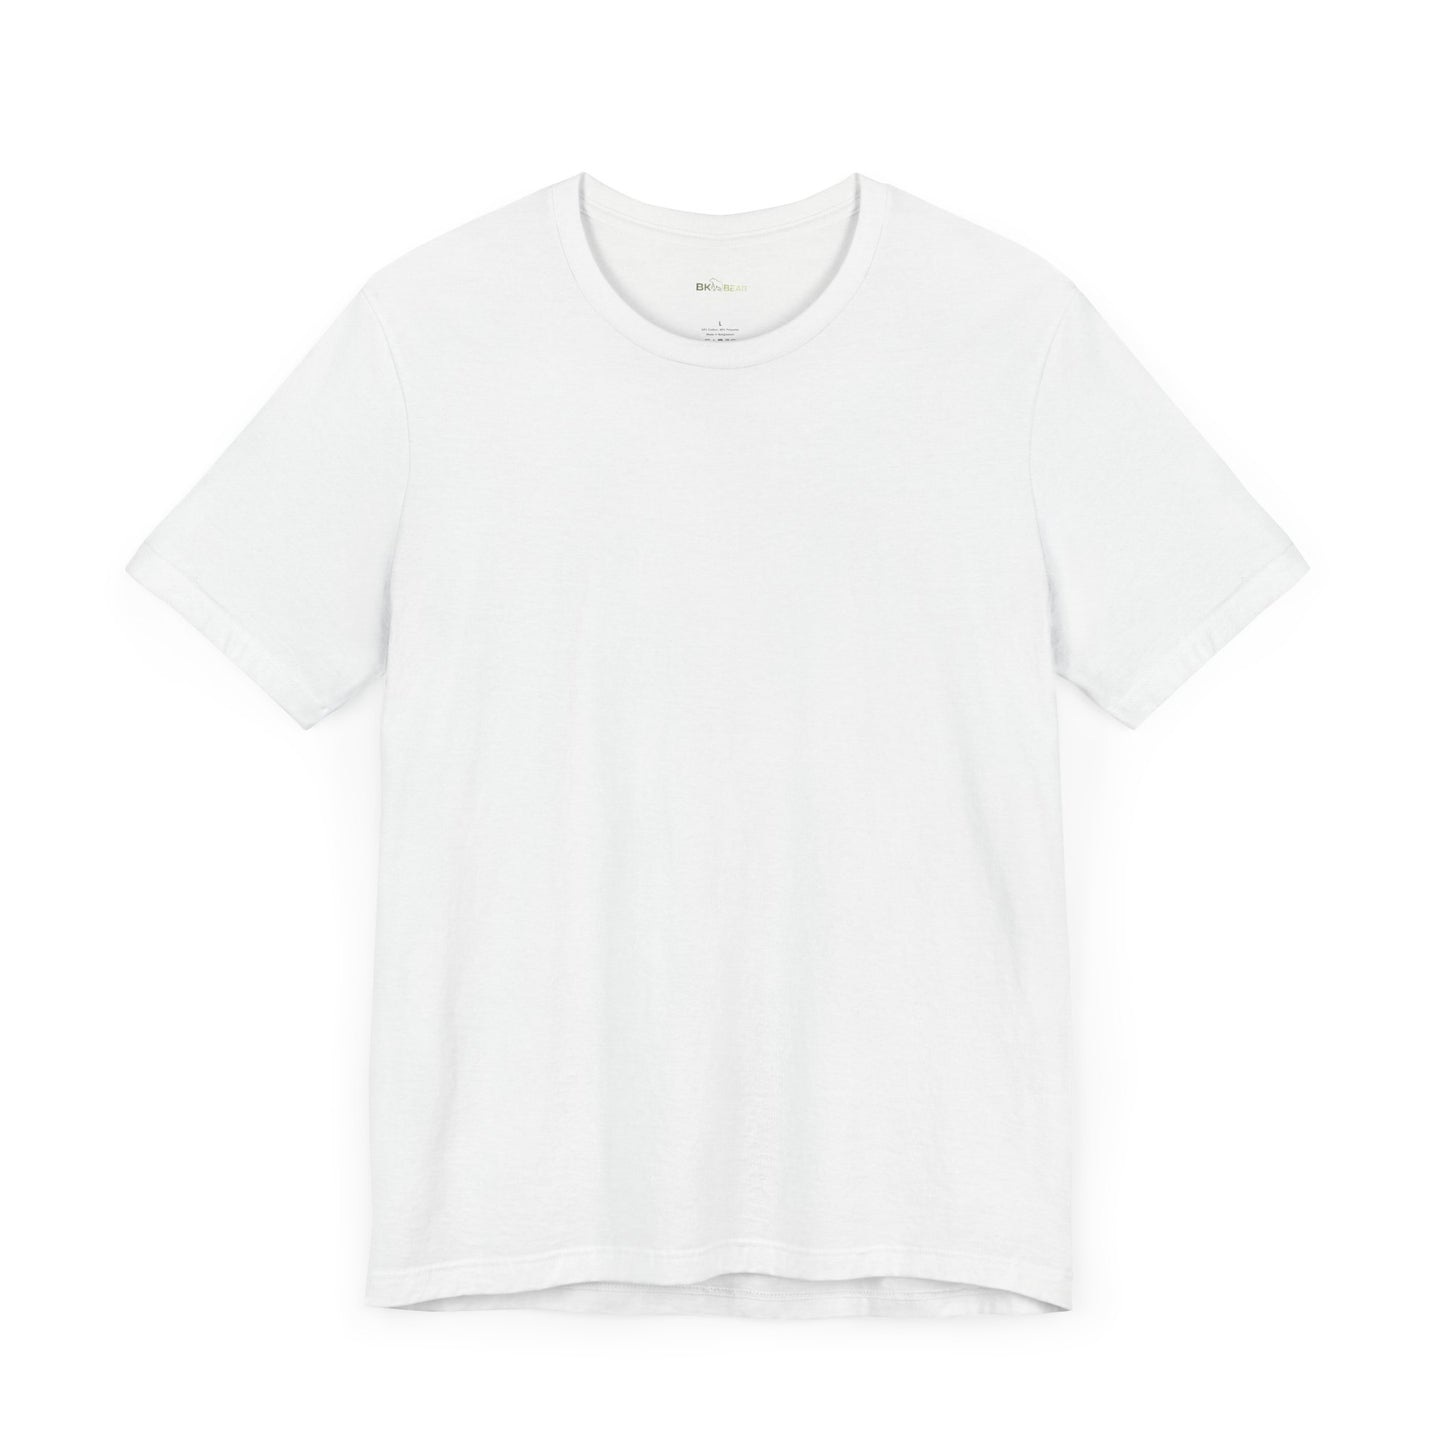 Solid White Blend. Unisex Jersey Short Sleeve Tee